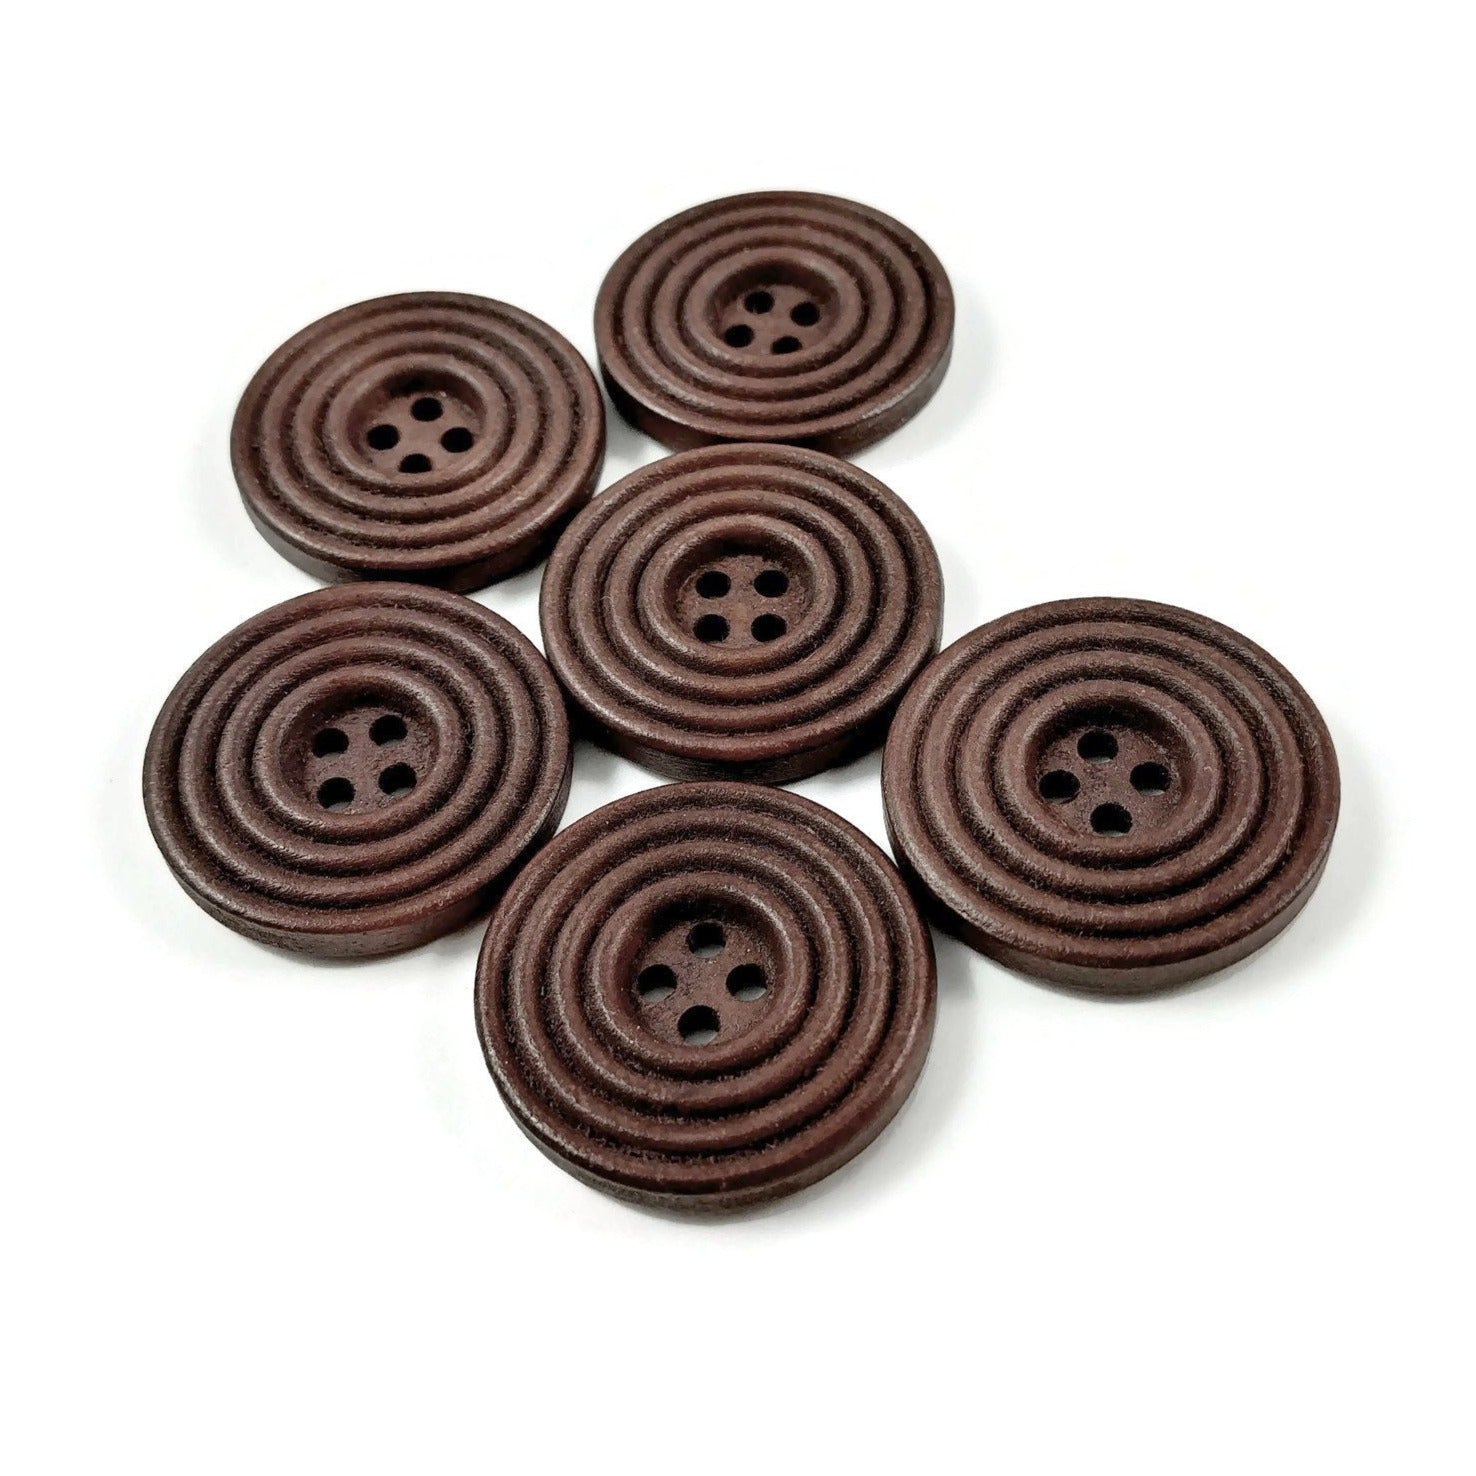 1 inch wooden sewing buttons 25mm - Set of 6 circle wood button - Choose your color